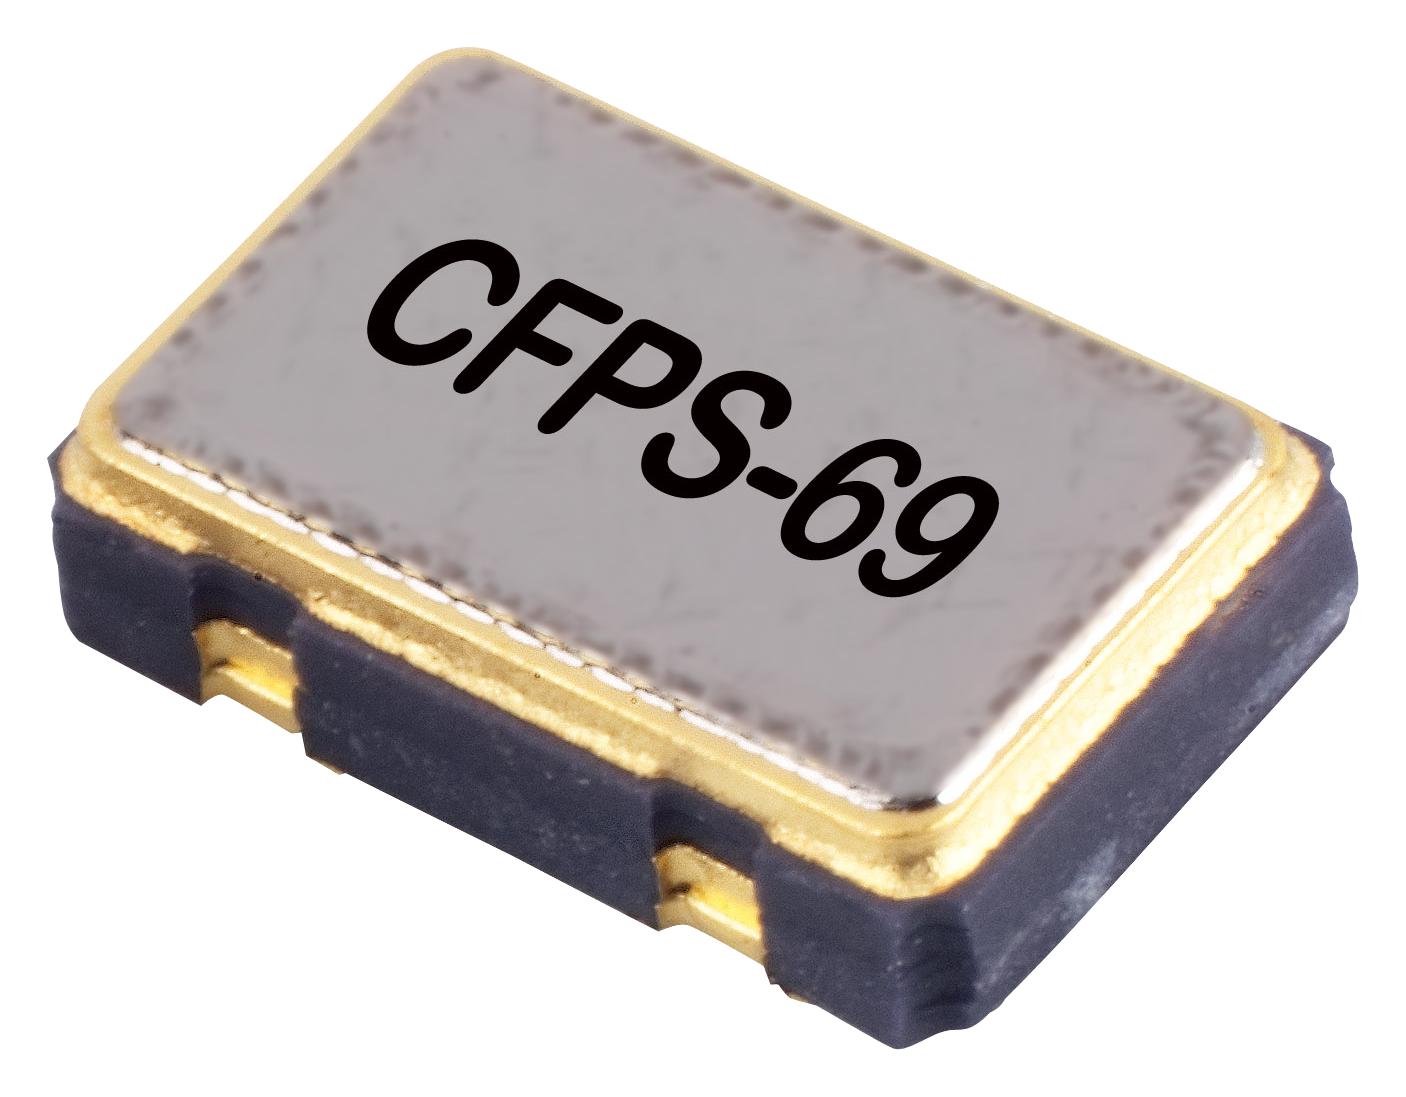 LFSPXO009586 CRYSTAL OSCILLATOR, SMD, 14.7456MHZ IQD FREQUENCY PRODUCTS